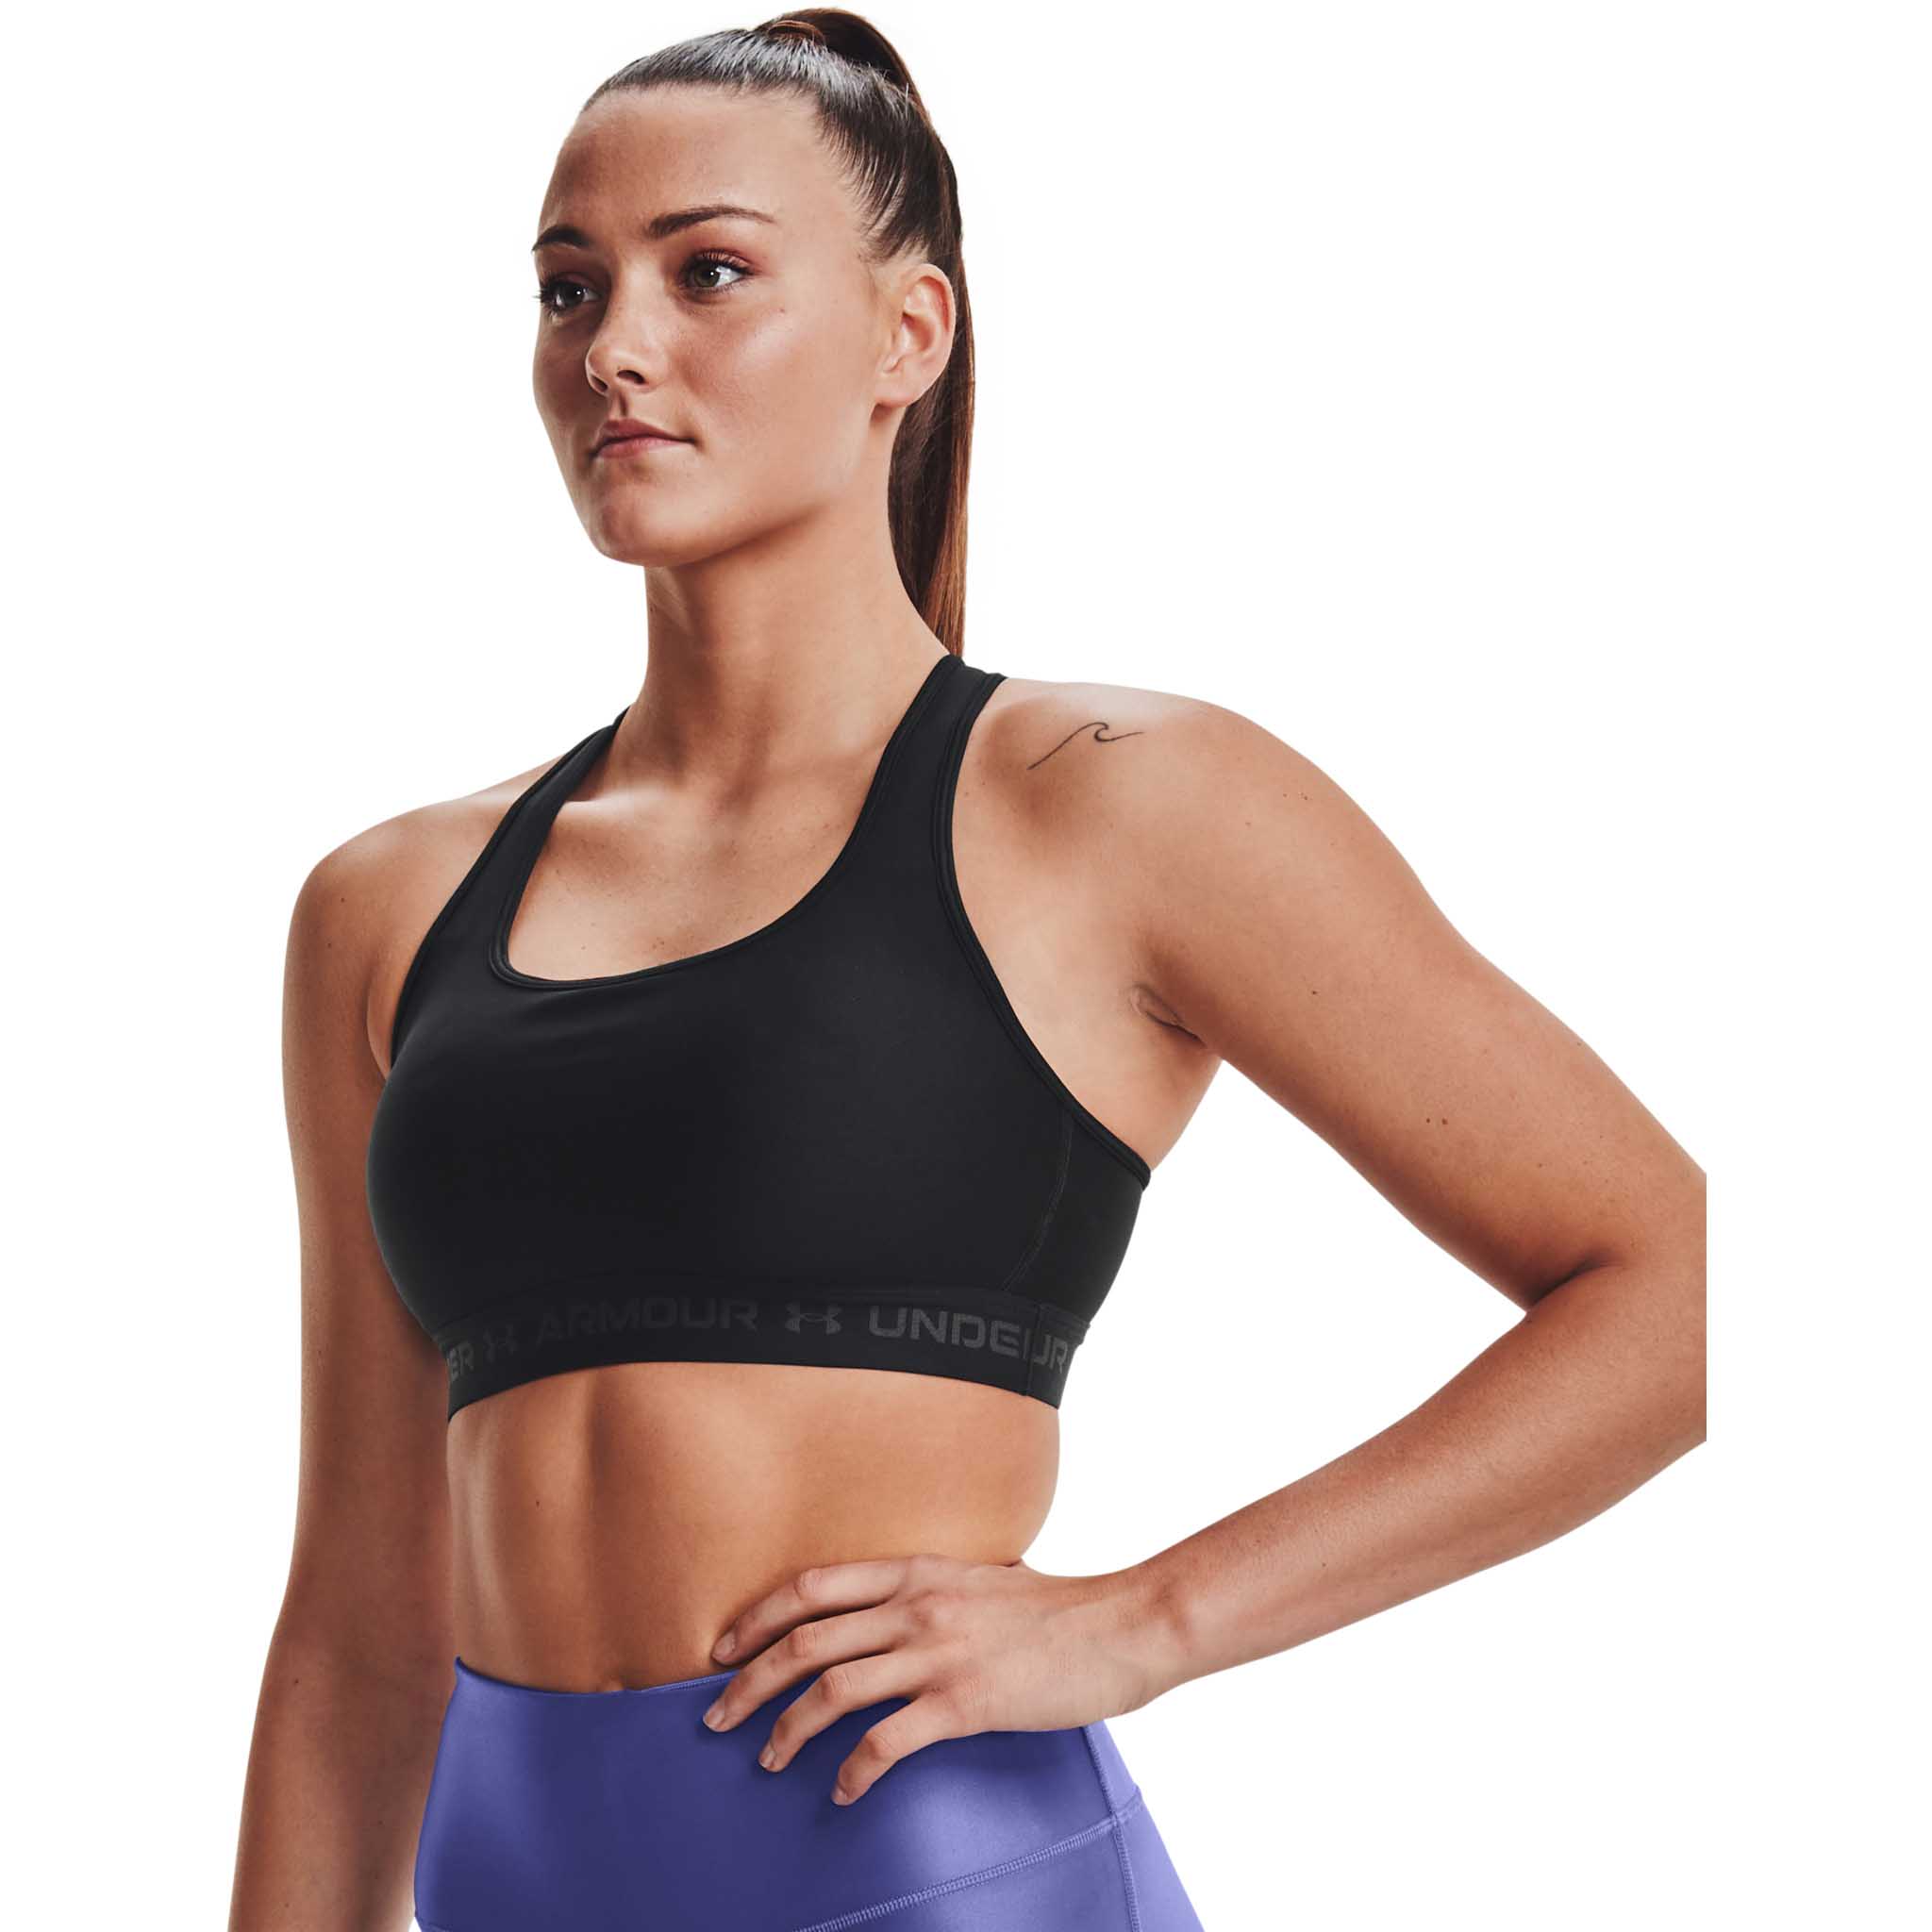 Under Armor Crossback Mid Bra - Undershirts And Fitness Tops